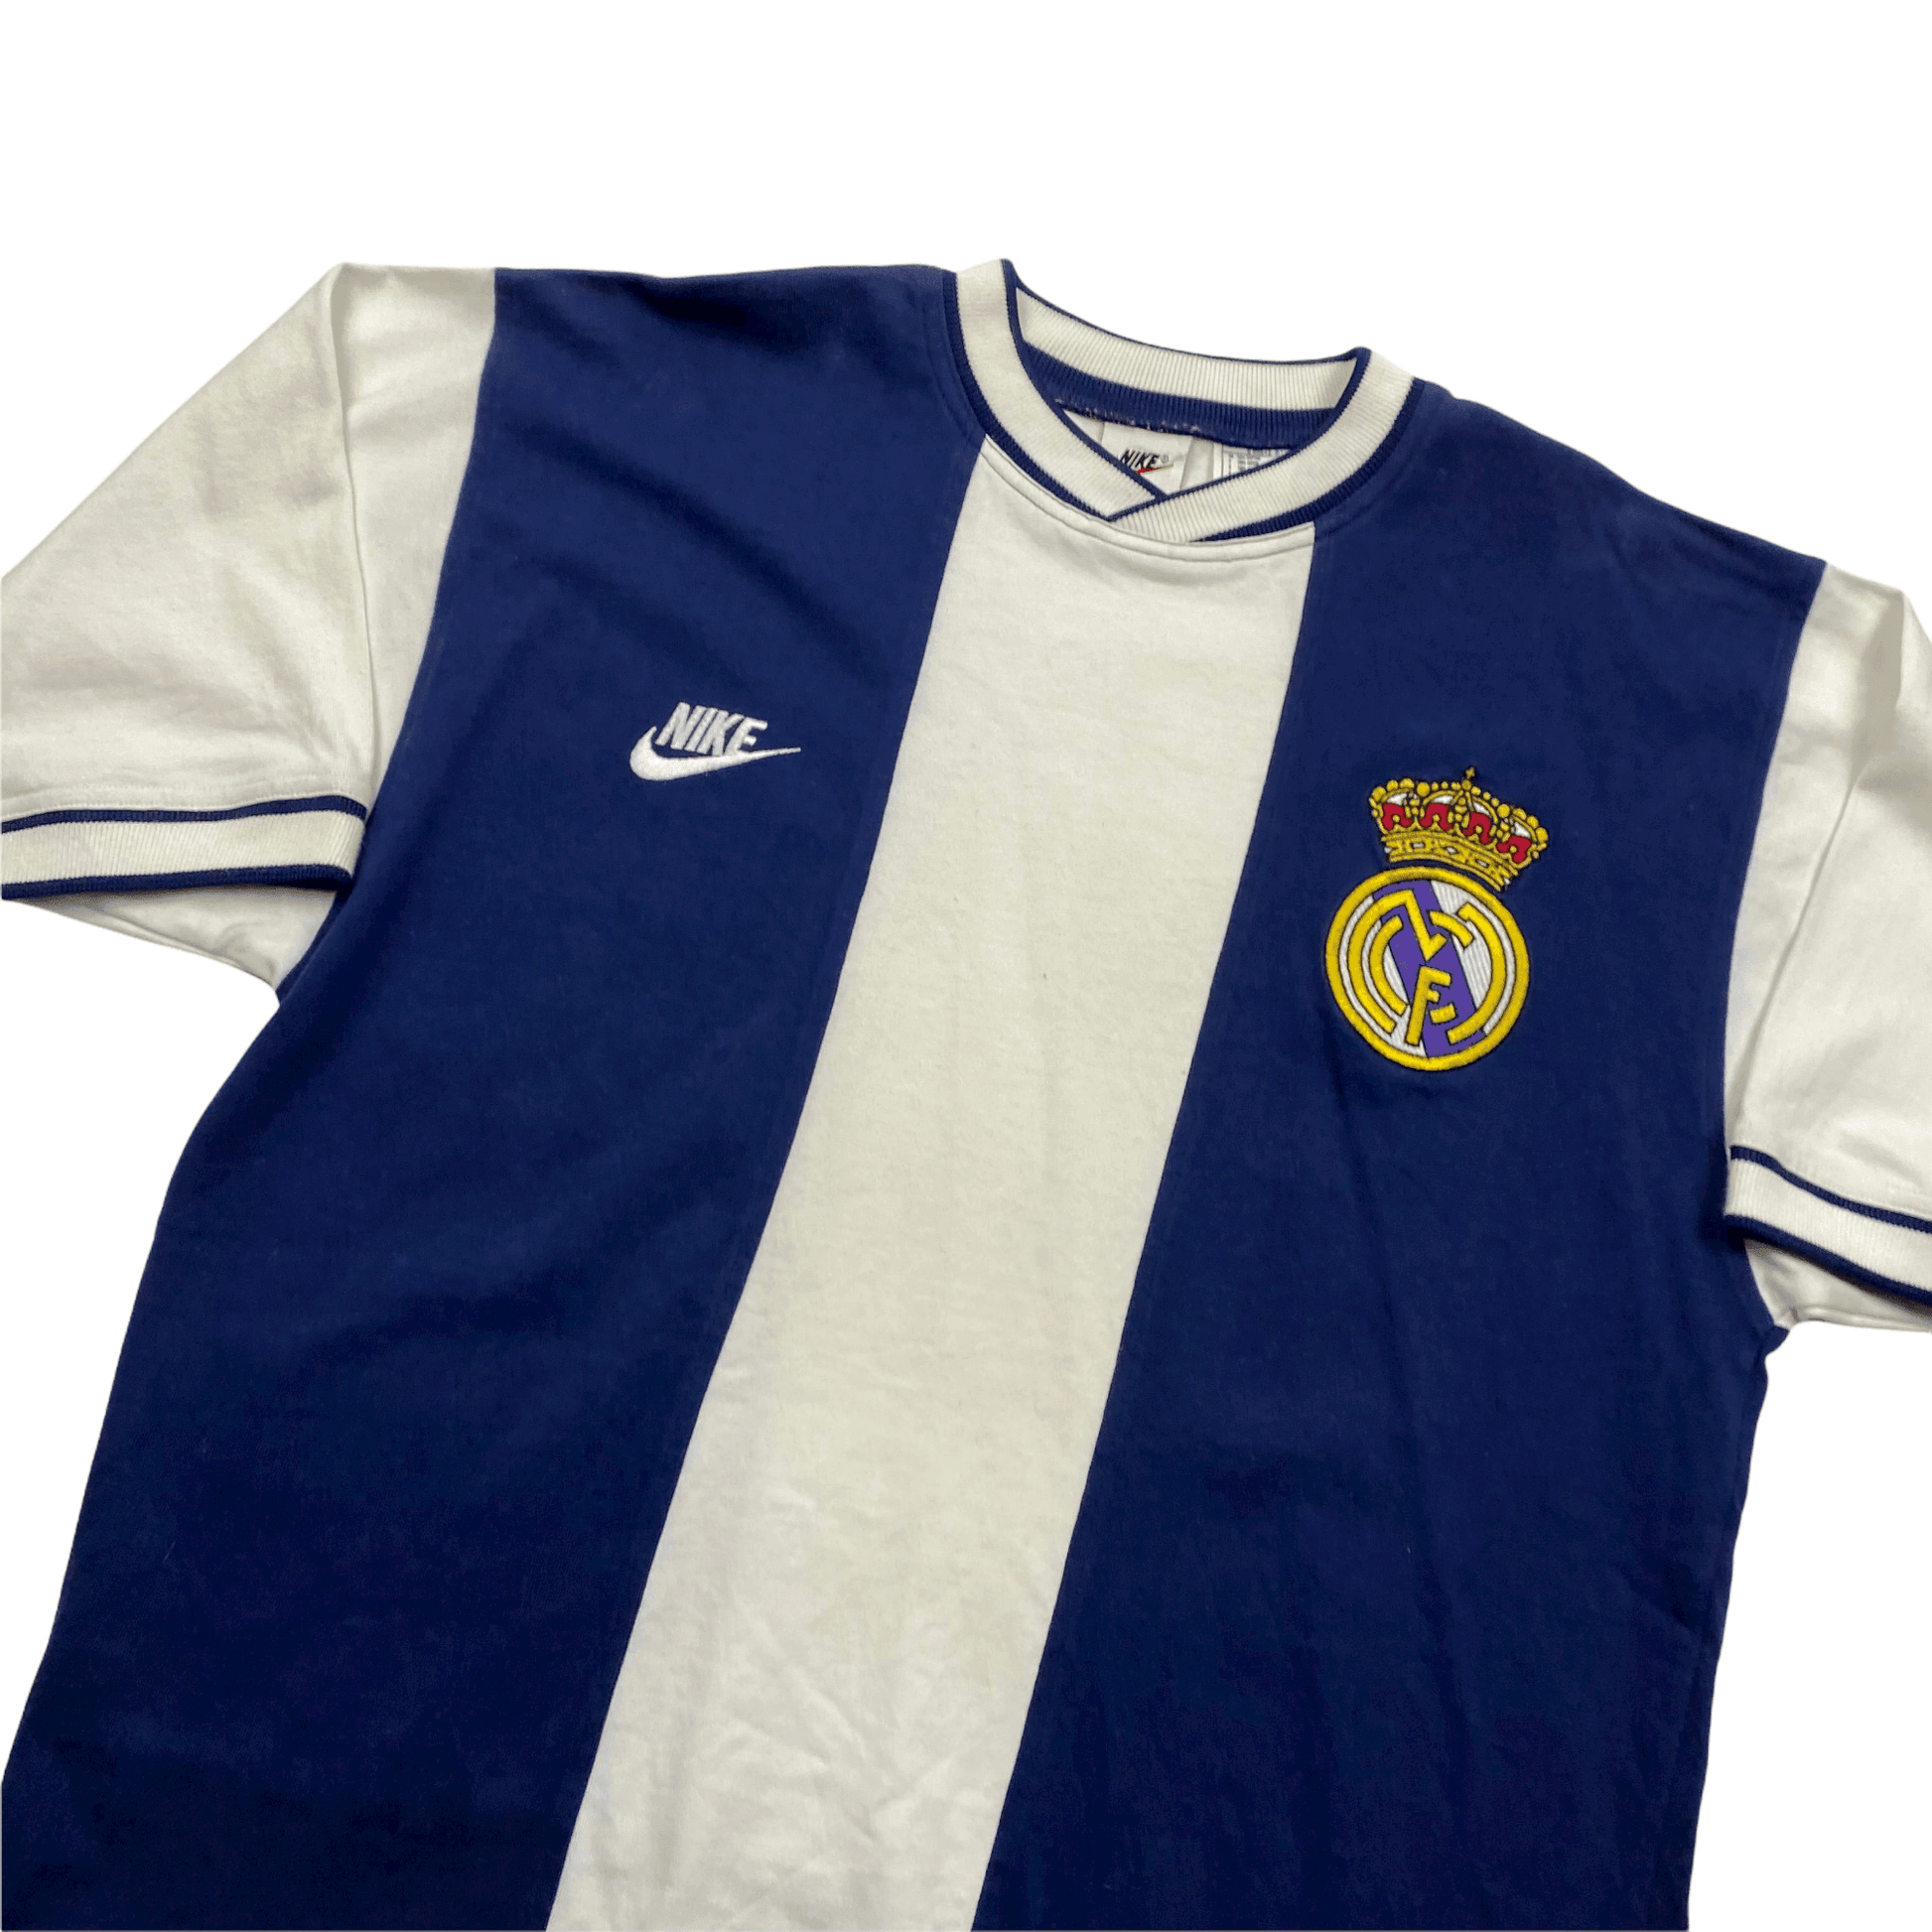 Vintage 90s White + Navy Blue Nike Real Madrid Football Tee - Small (Recommended Size - Medium) - The Streetwear Studio